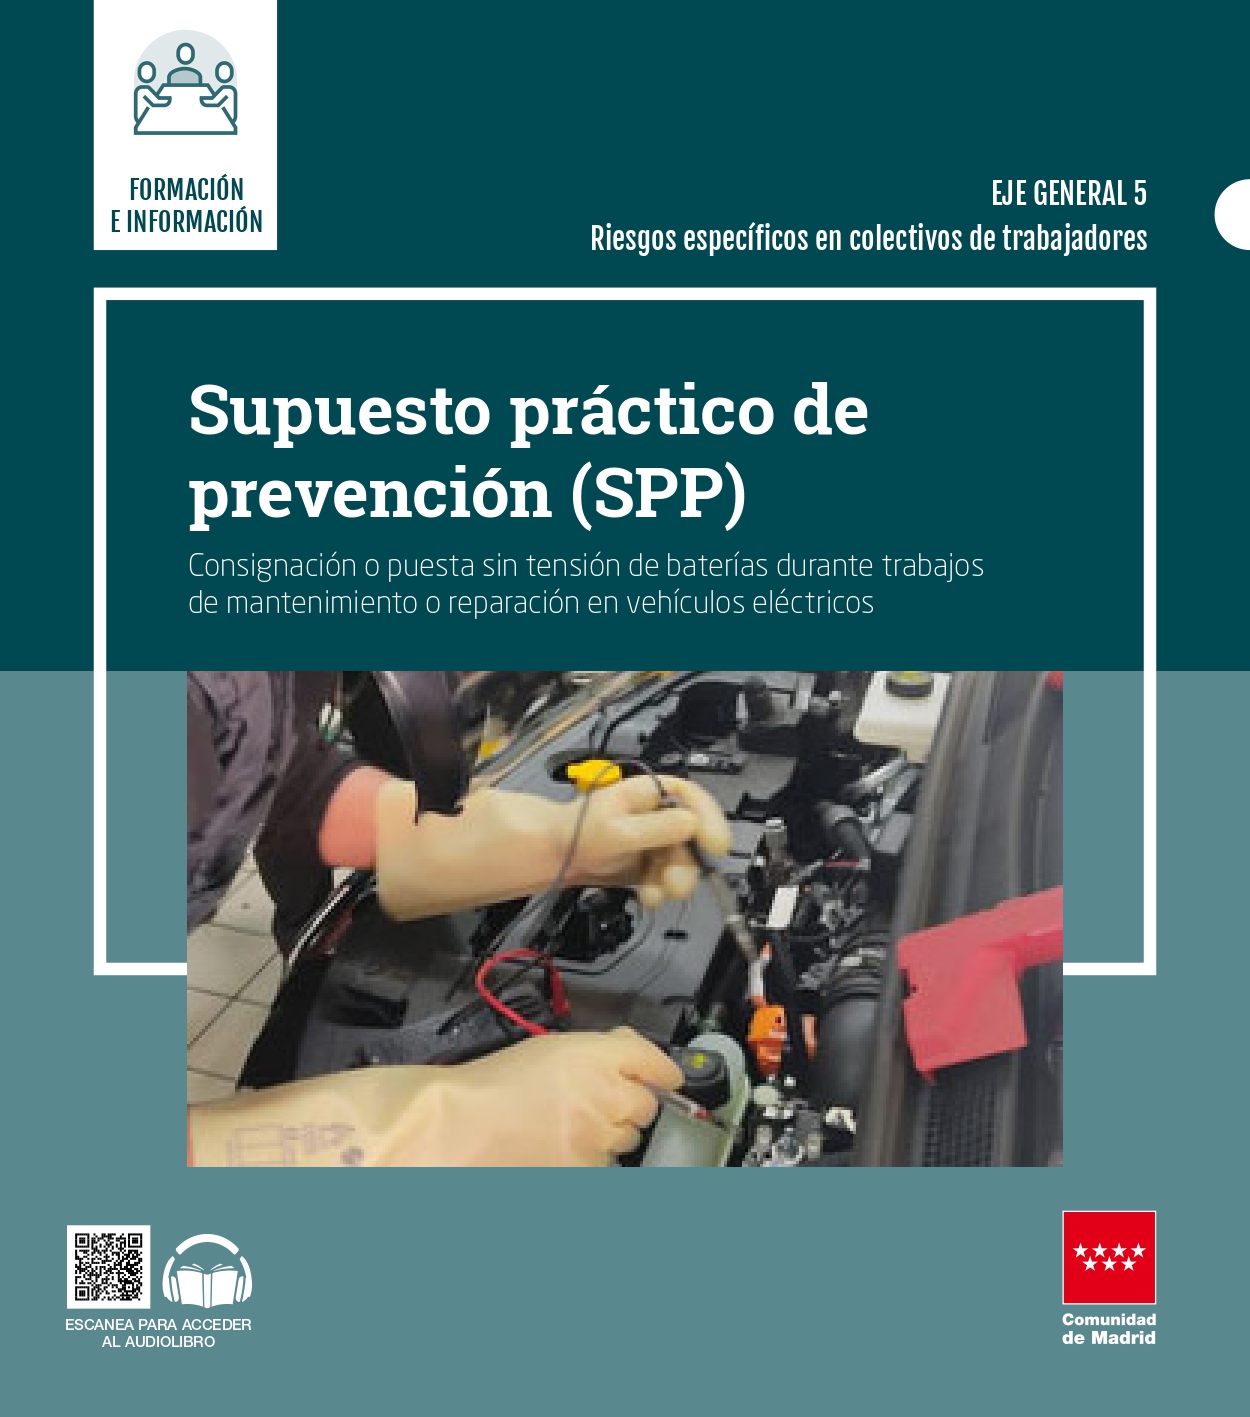 Cover of Practical Prevention Assumption (SPP). Consignment or disconnection of batteries during maintenance or repair work on electric vehicles